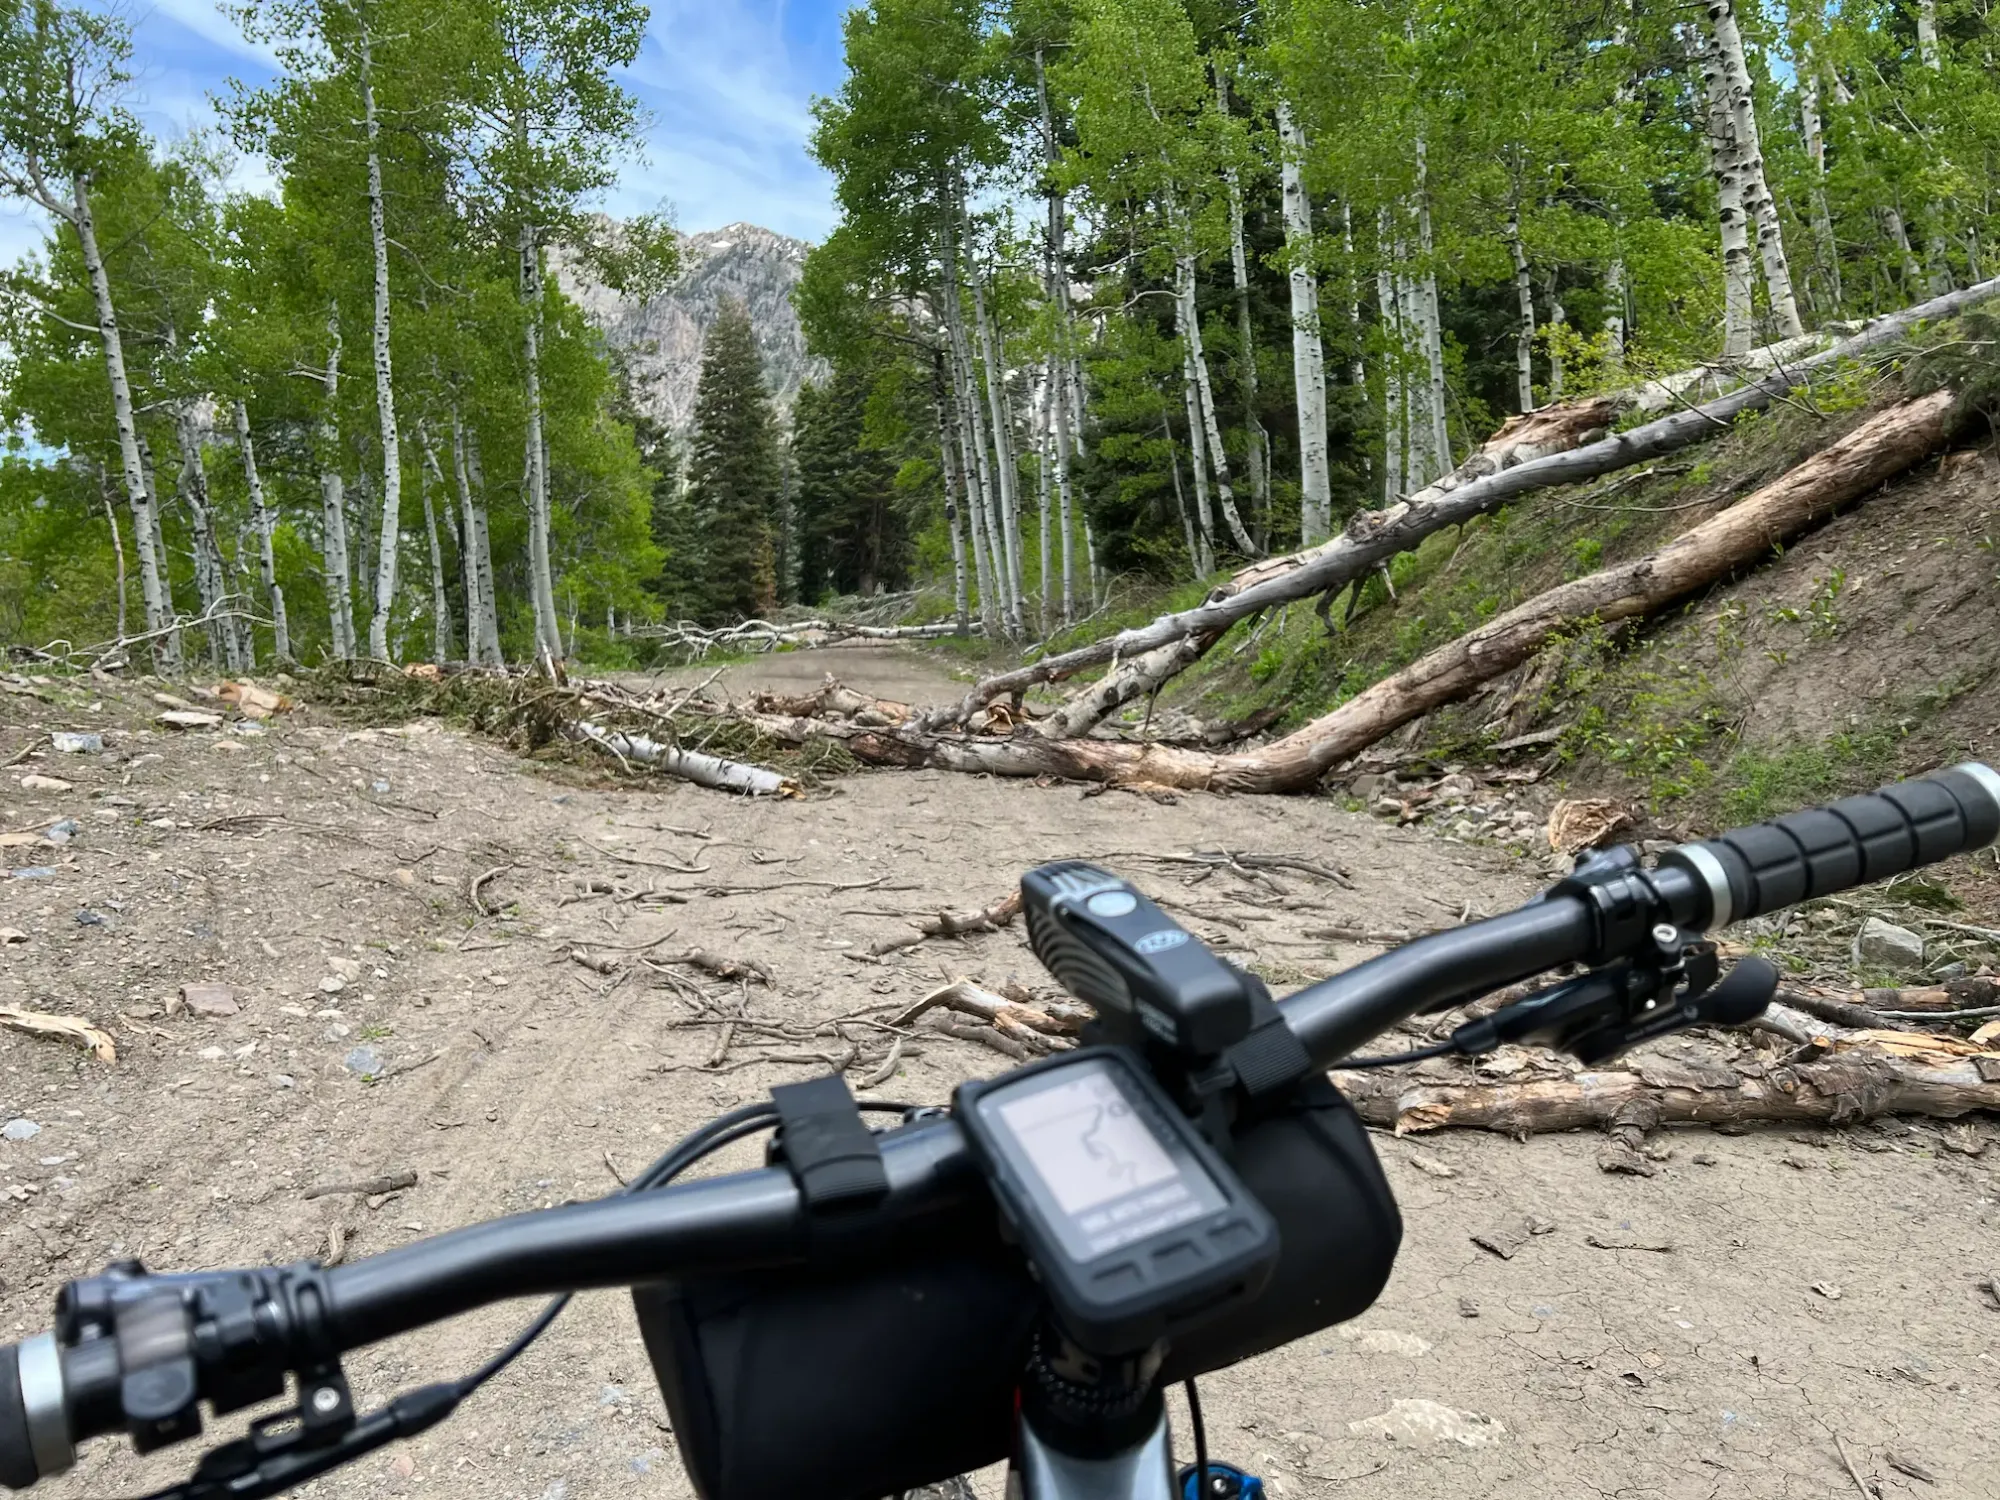 Keith has encountered several downed trees blocking his route while out on an adventure ride in the Wasatch Mountains